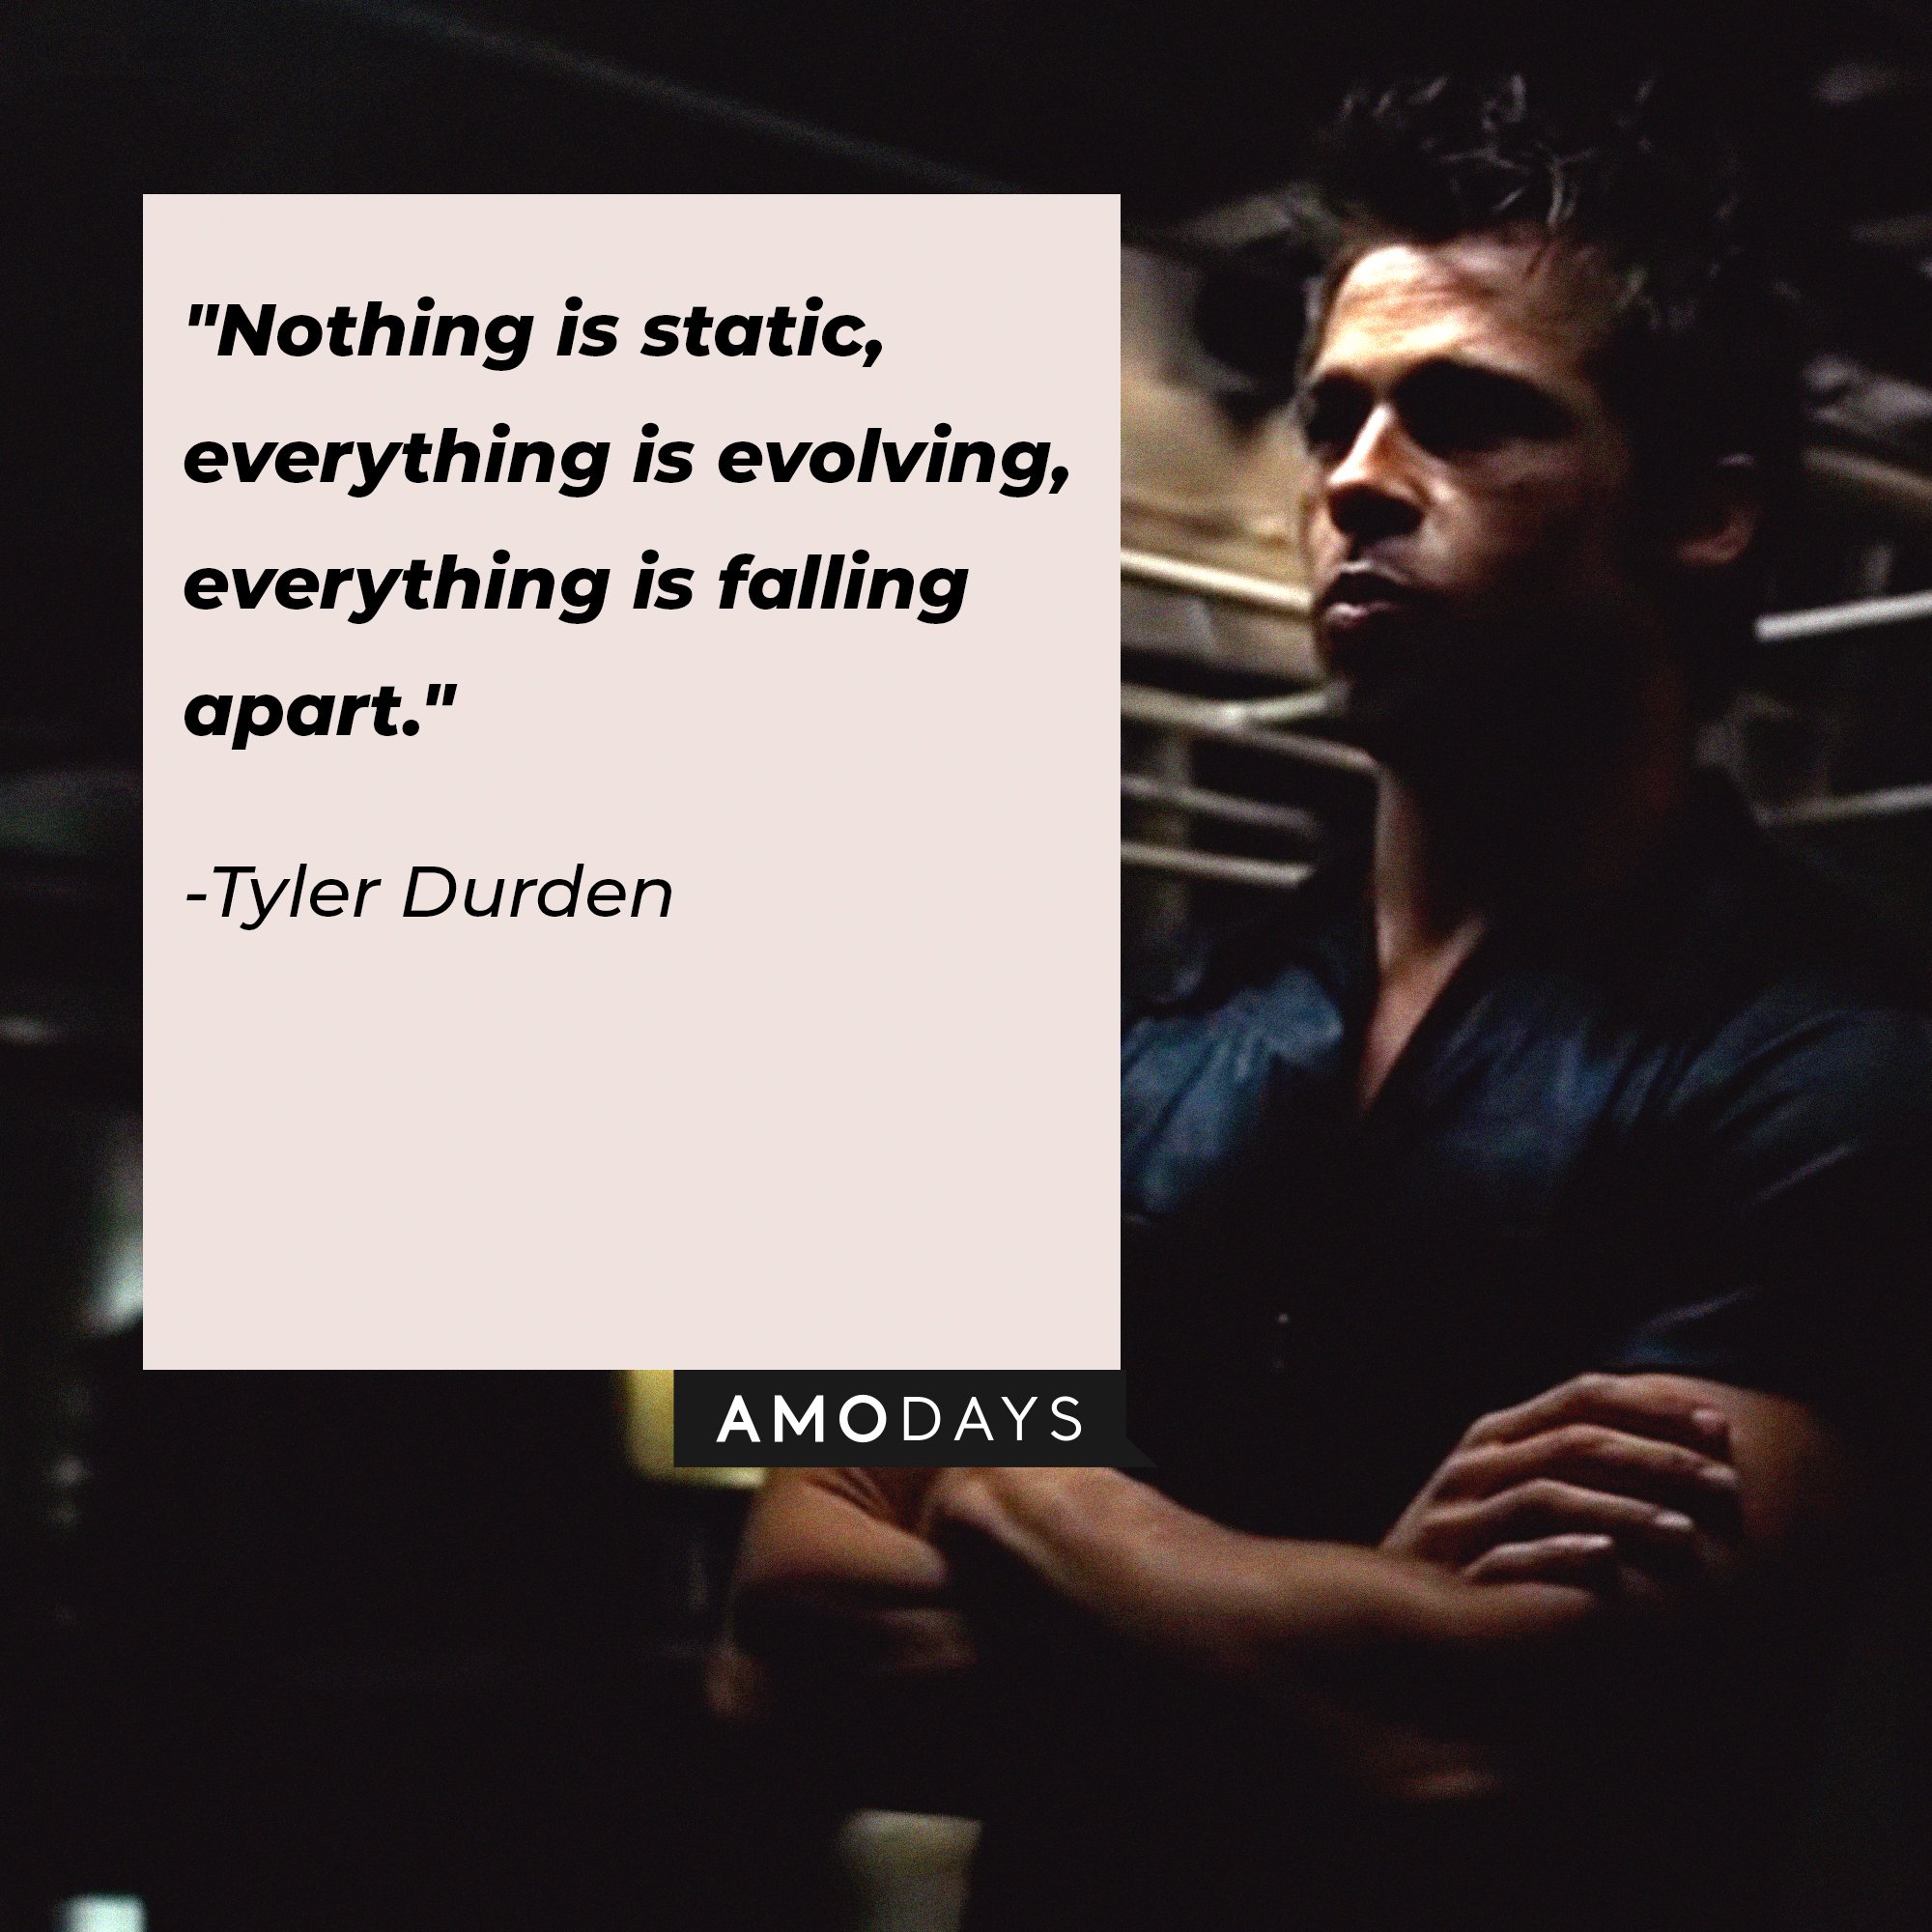 Tyler Durden’s quote: "Nothing is static, everything is evolving, everything is falling apart." | Image: AmoDays